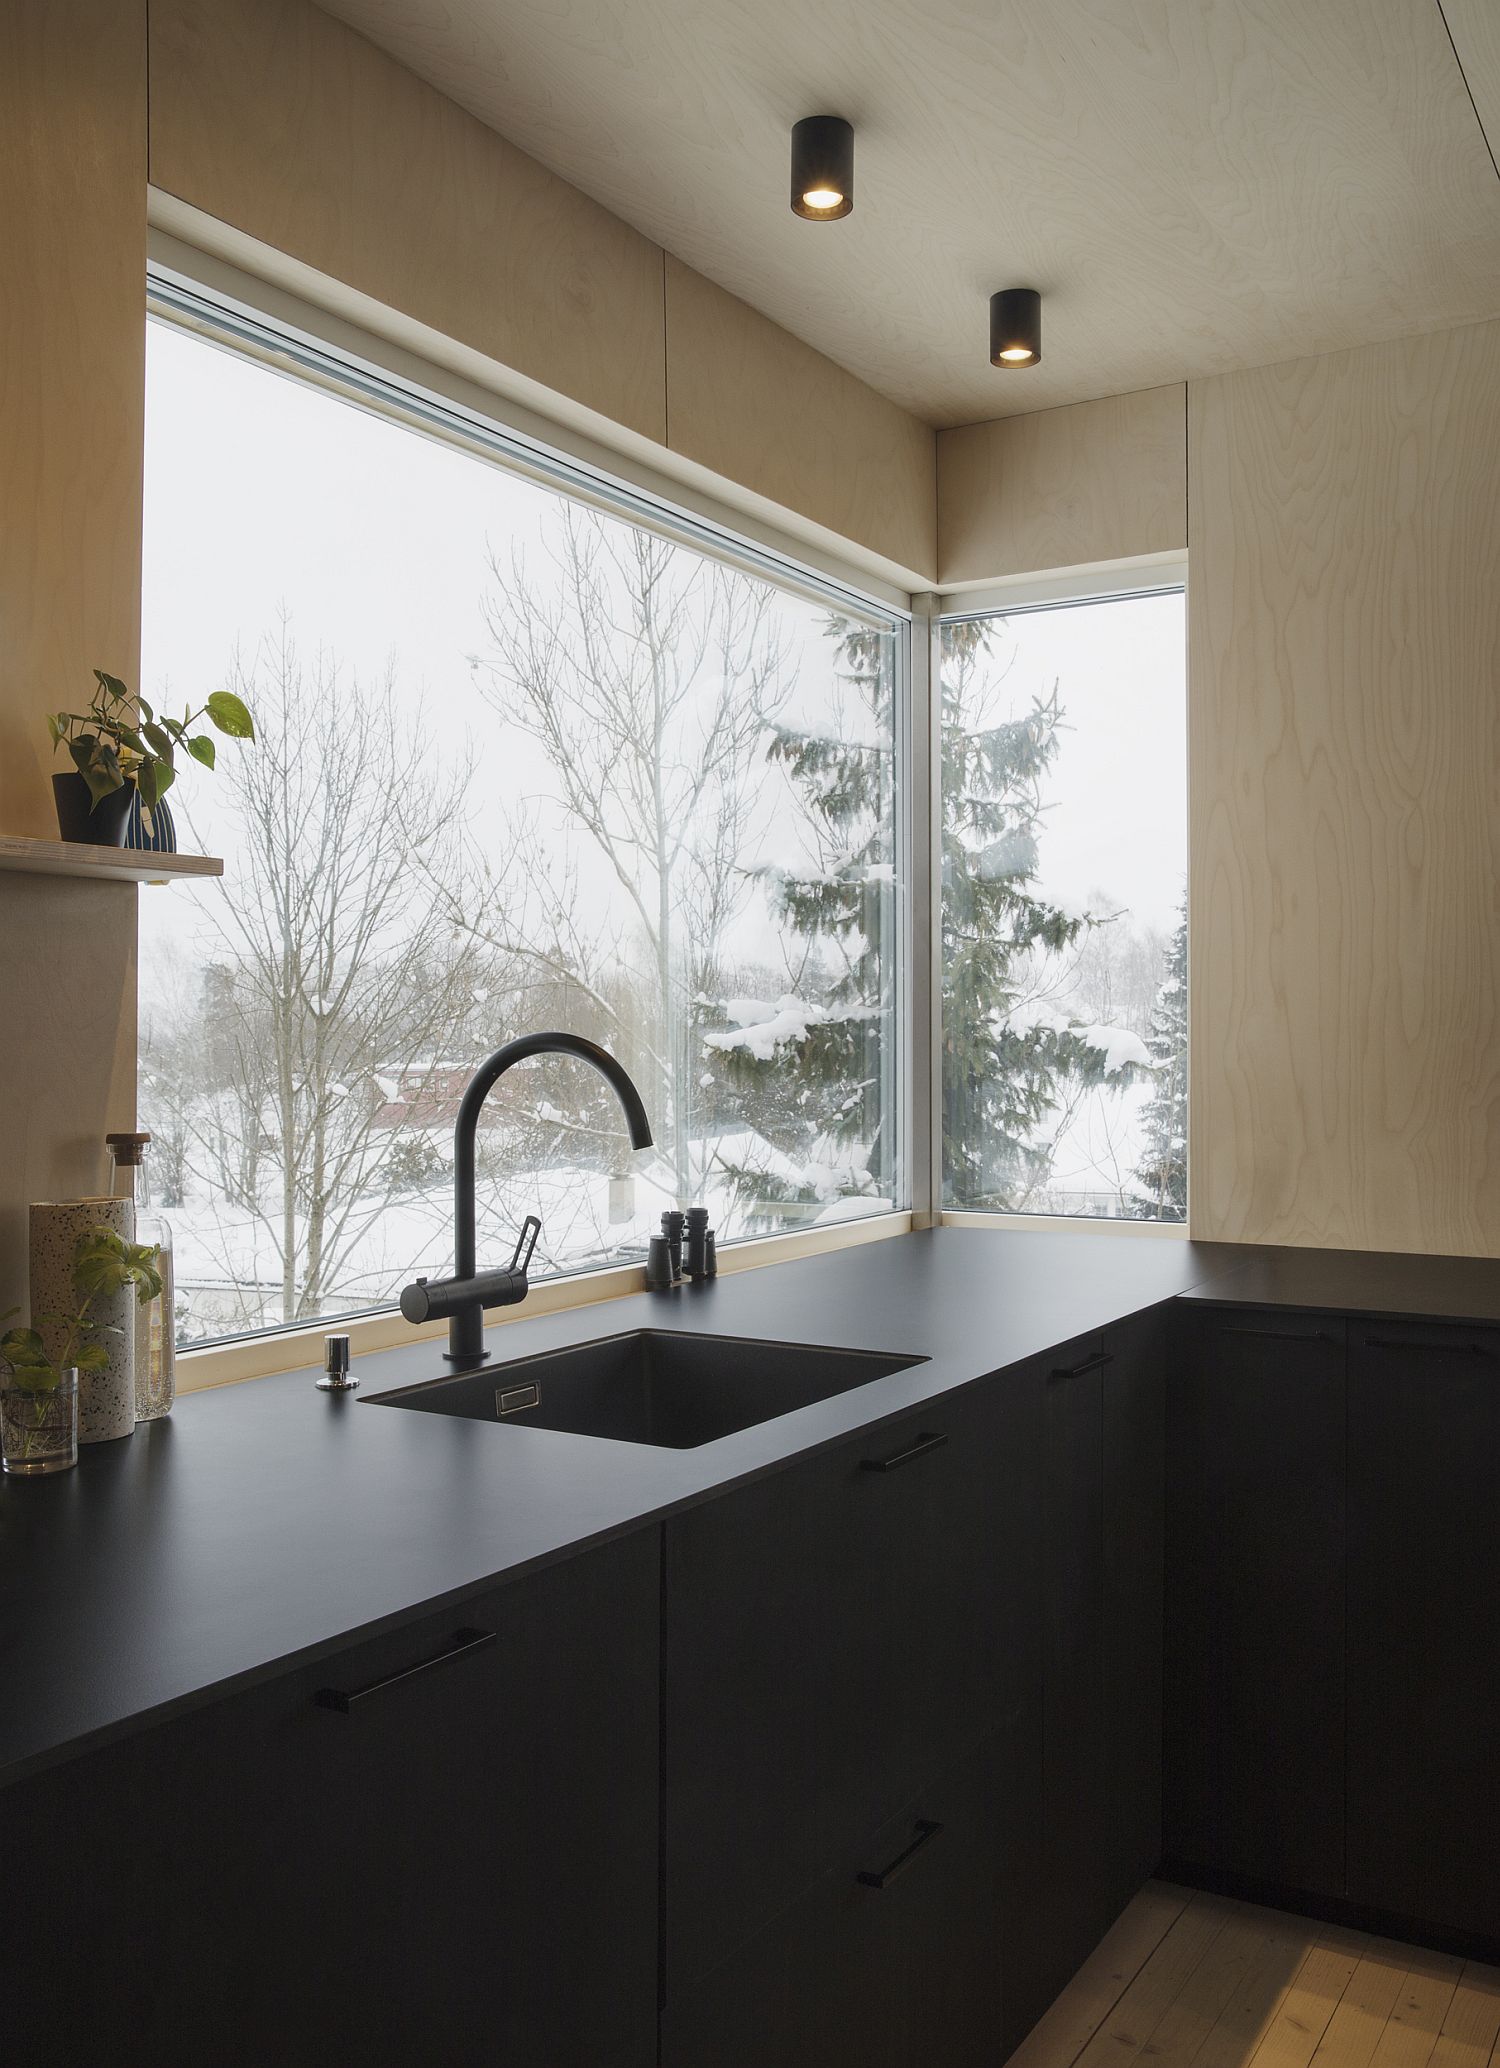 Corner-window-in-the-kitchen-brings-in-ample-natural-light